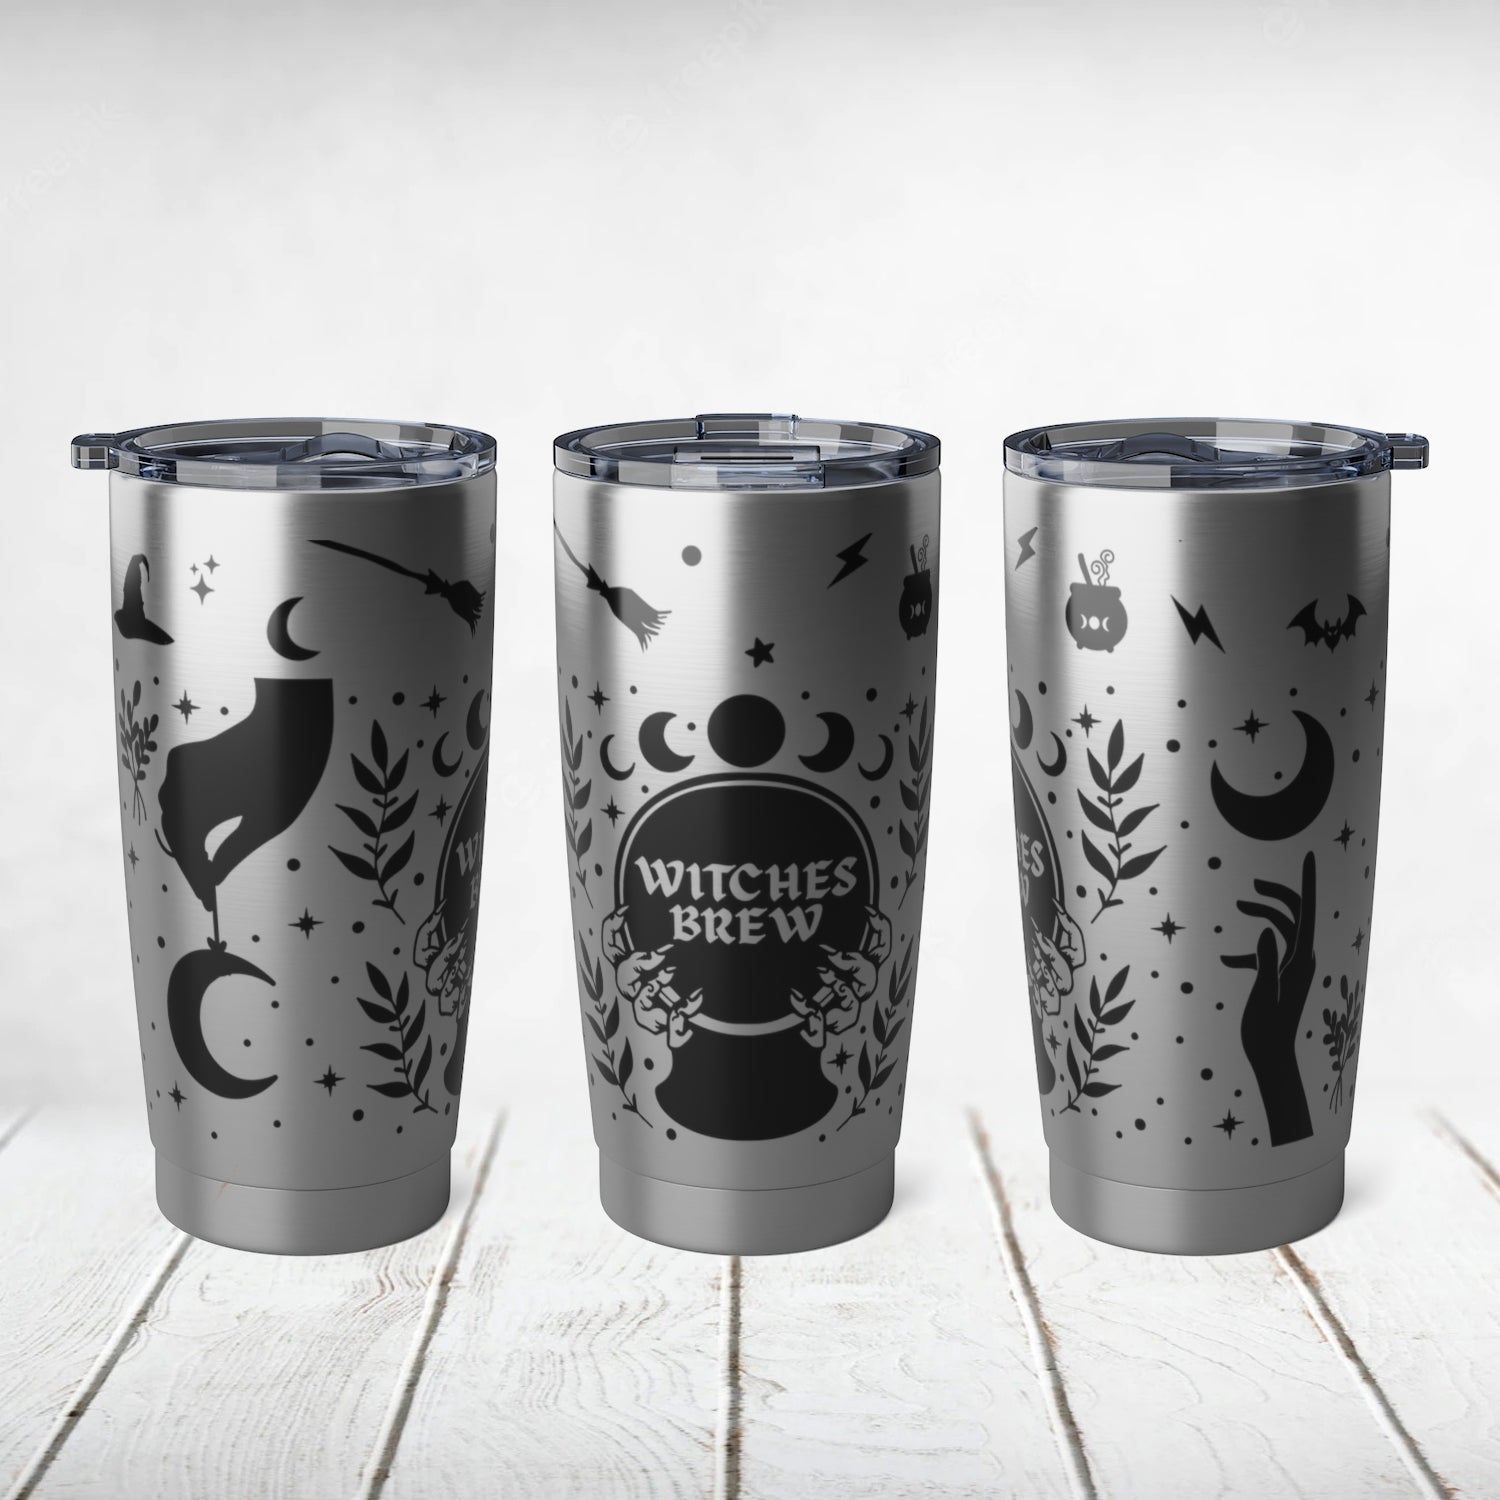 Moon phase Witchy woman Tumbler - Witch Tumbler